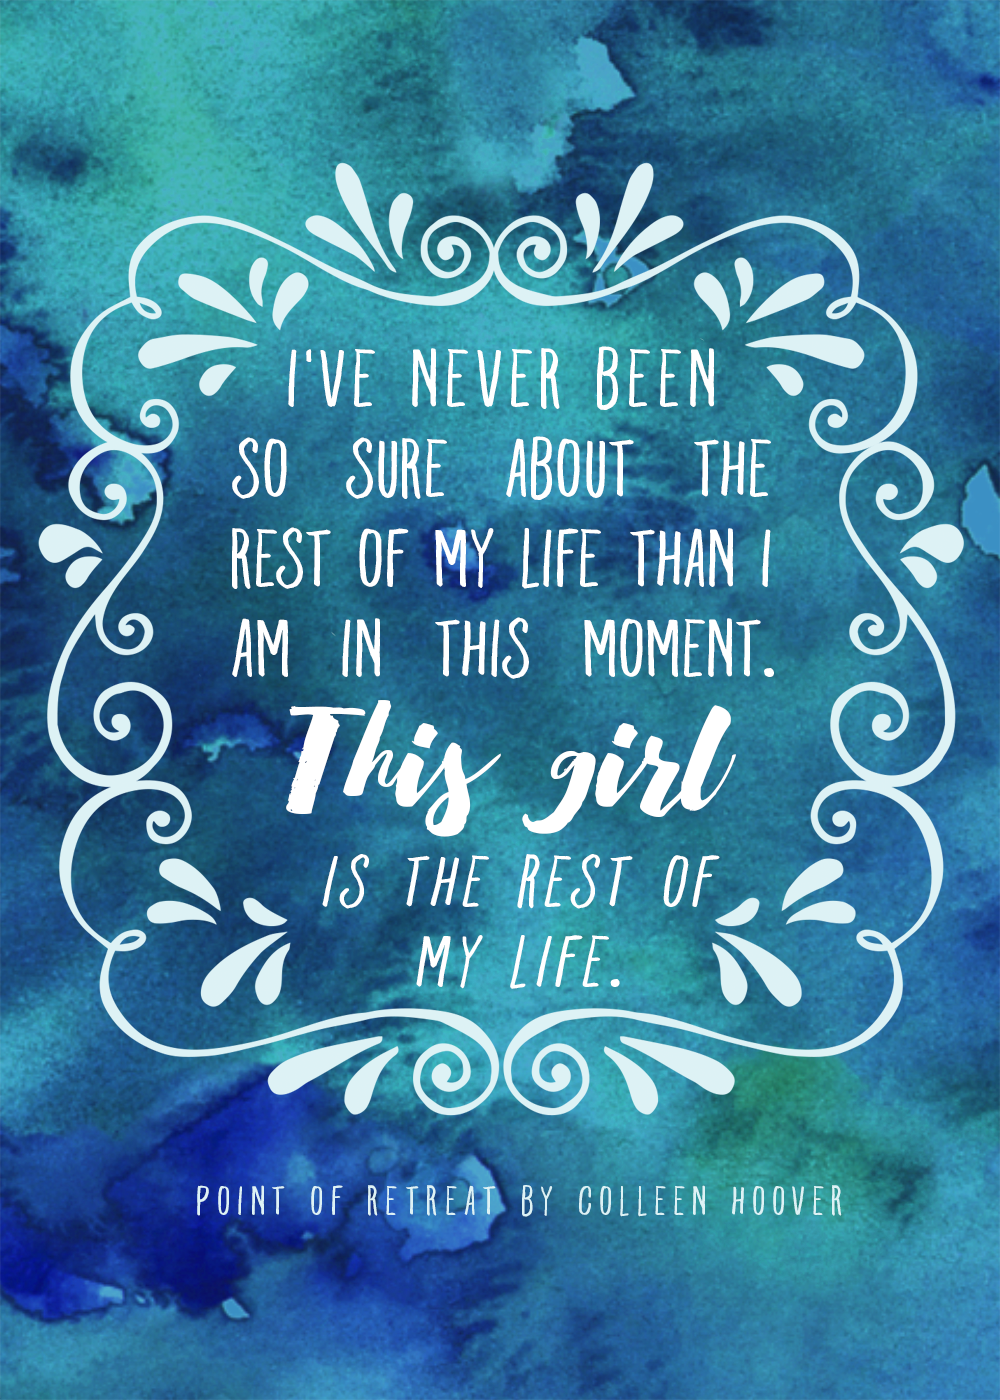 point of retreat by colleen hoover quote - this girl is the rest of my life